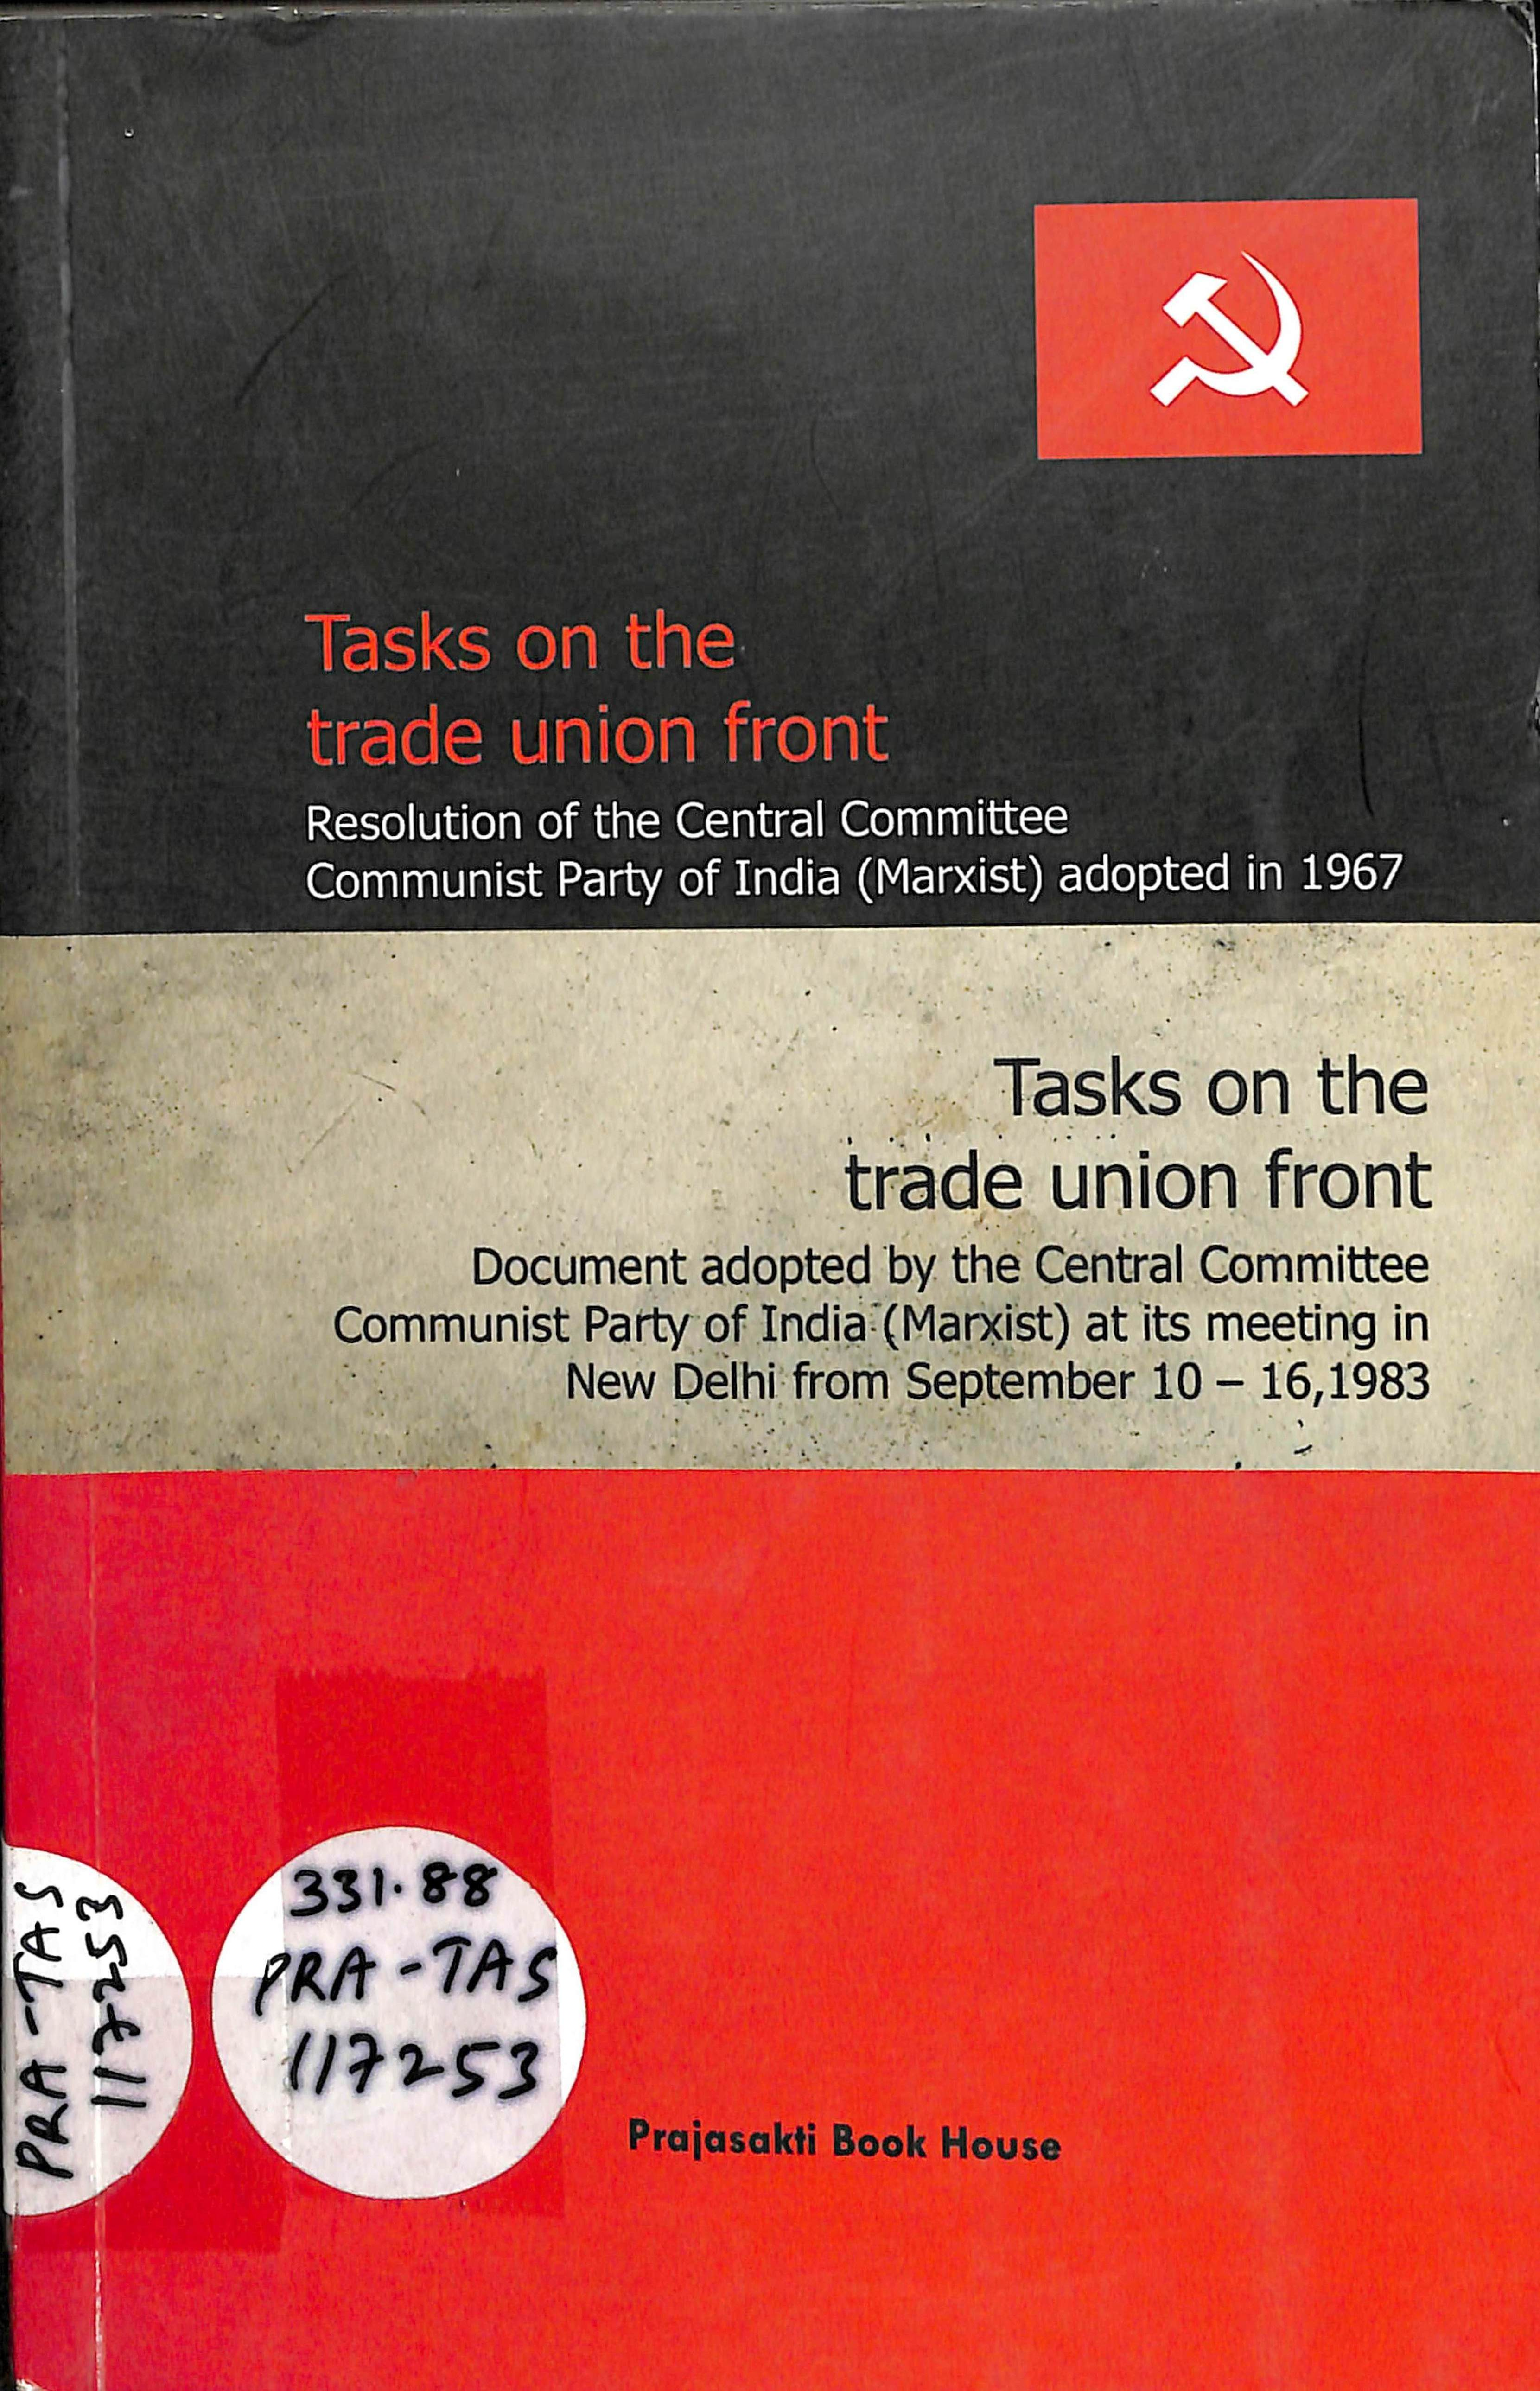 Tasks on the trade union front resoultion of the central committee communist party of India